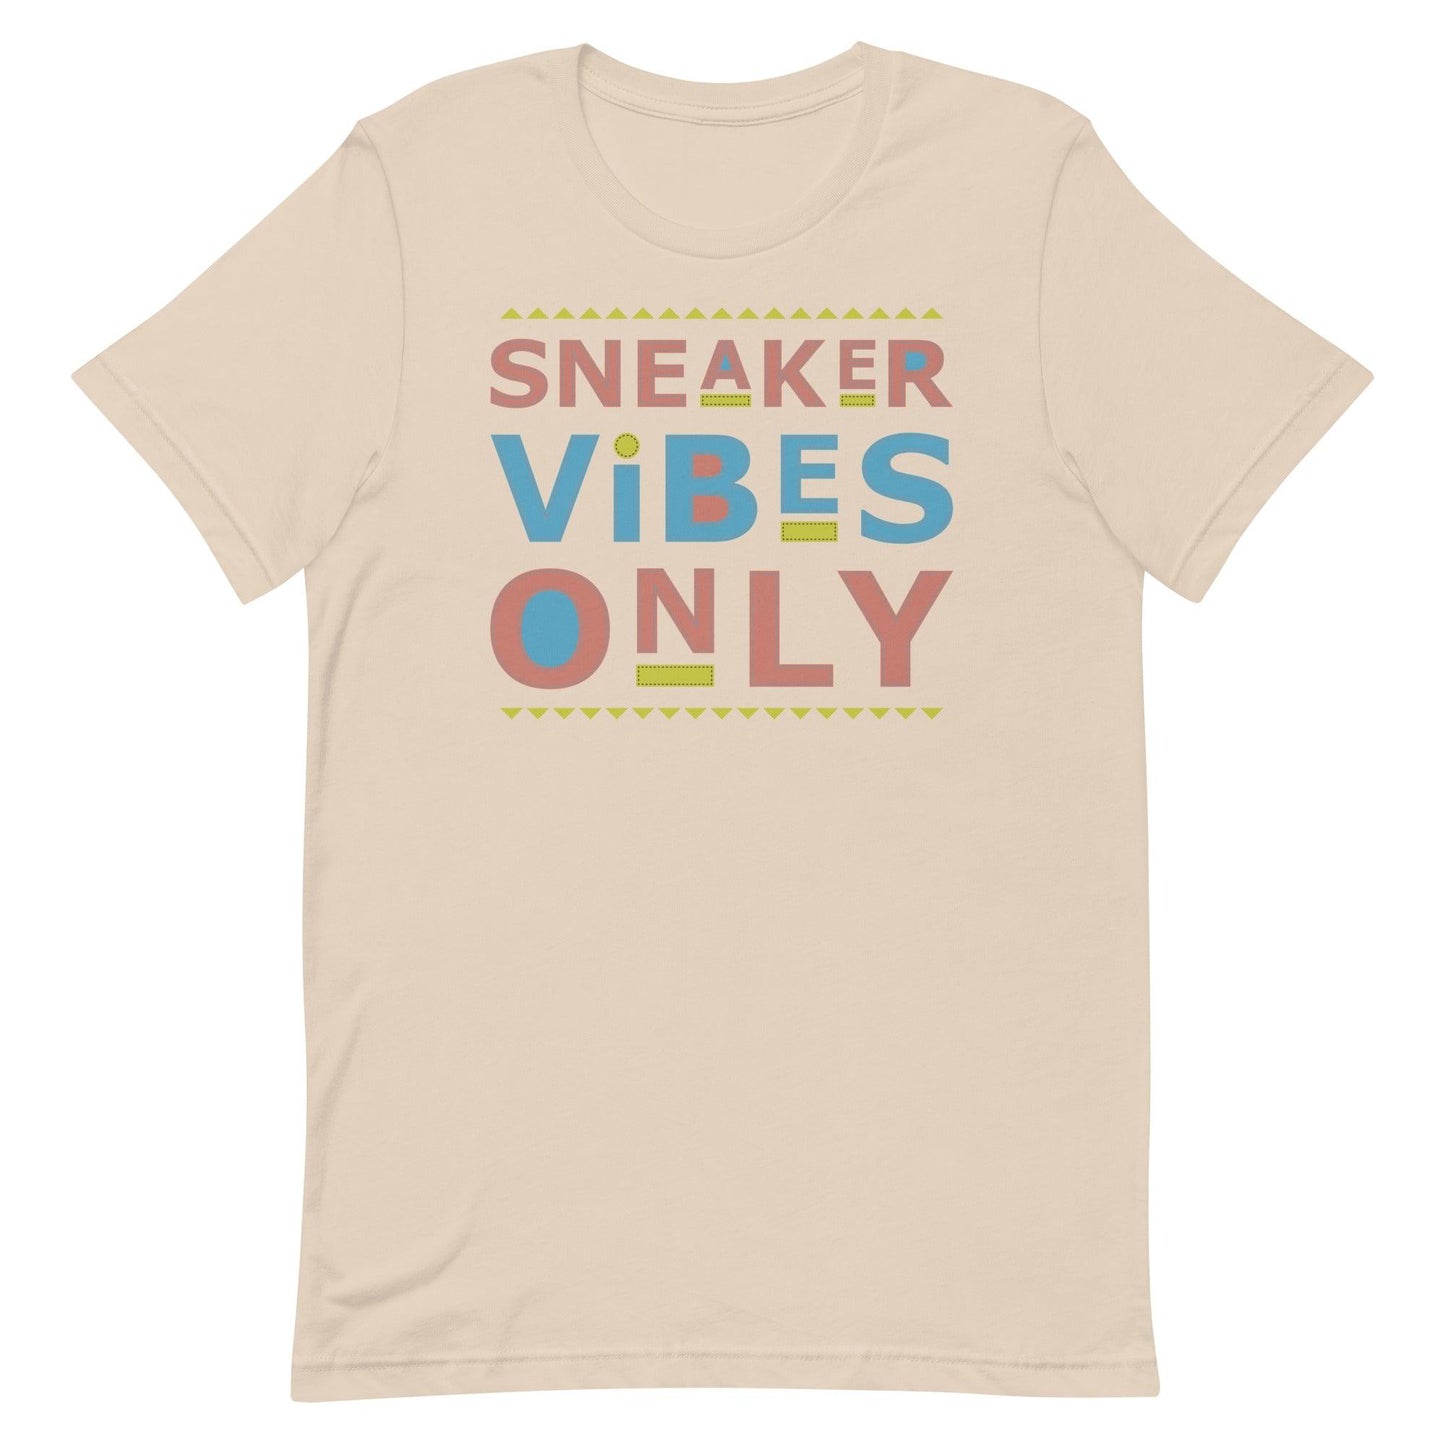 Sneaker Vibes Only Shirt To Match Nike Air Max 1 Light Madder Root - SNKADX